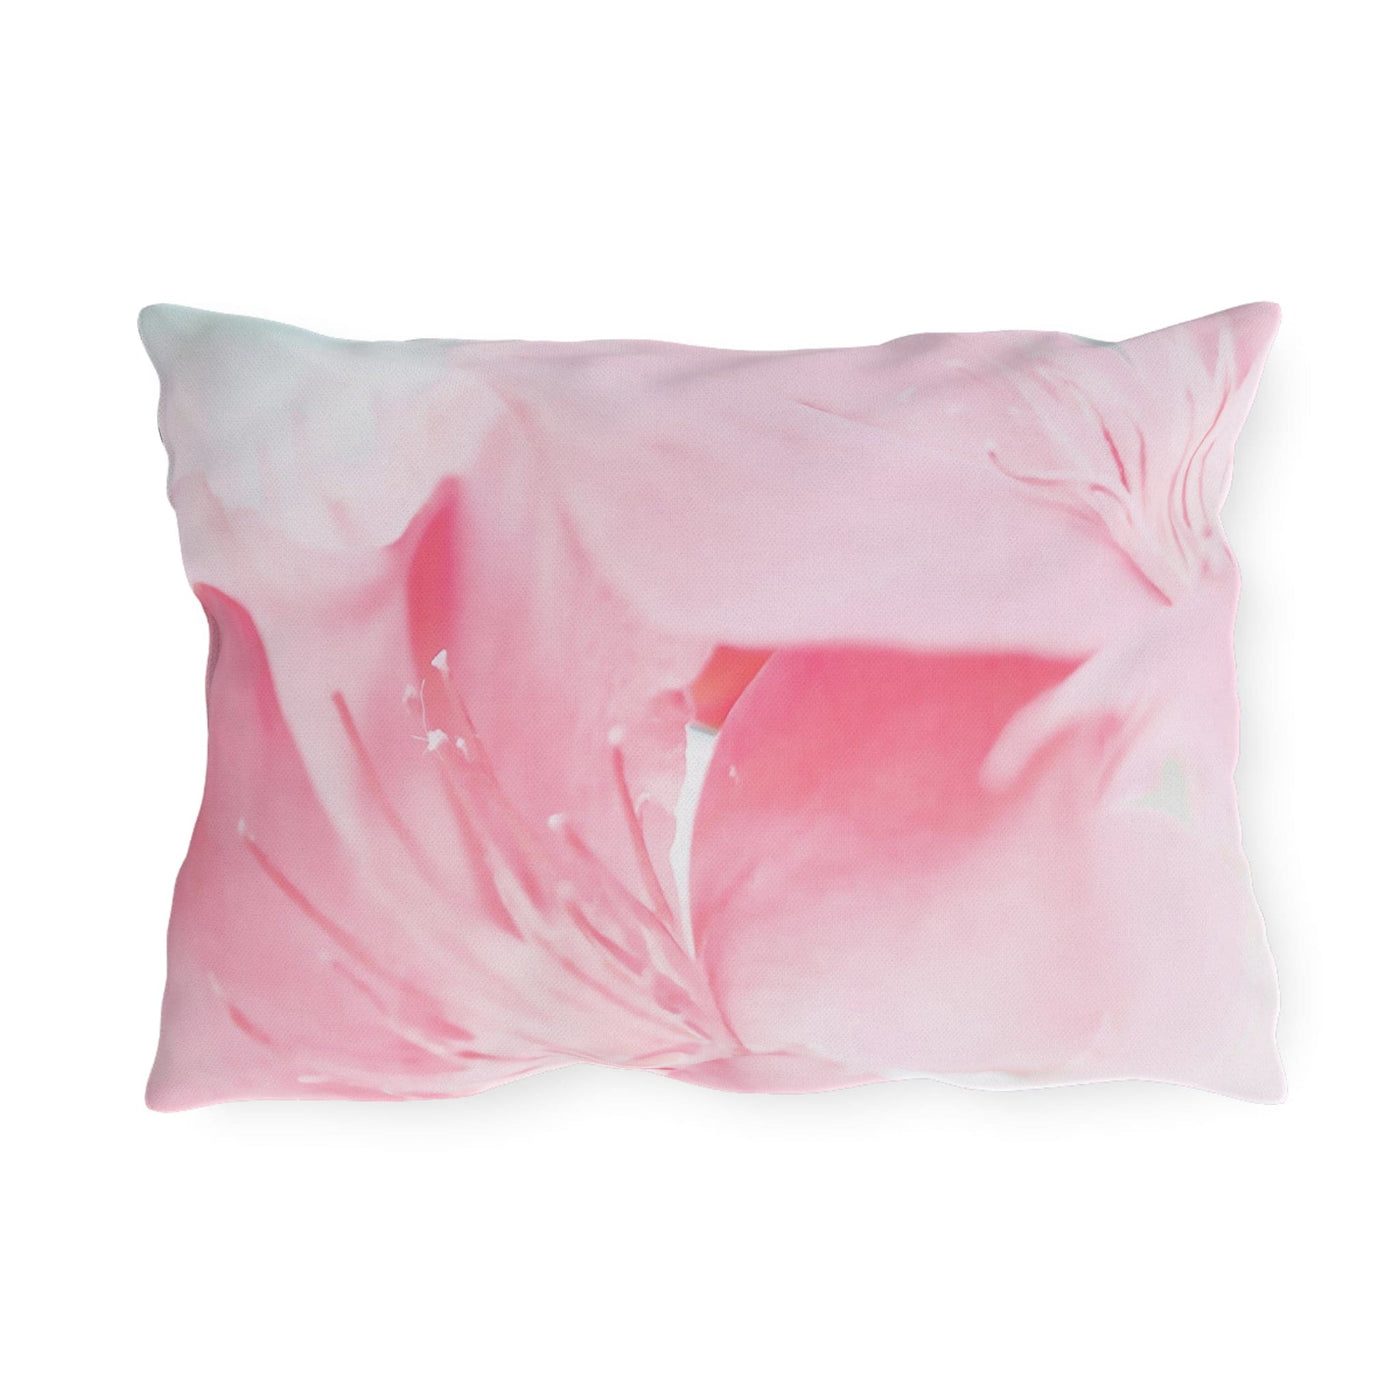 Decorative Outdoor Pillows With Zipper - Set Of 2 Pink Flower Bloom Peaceful